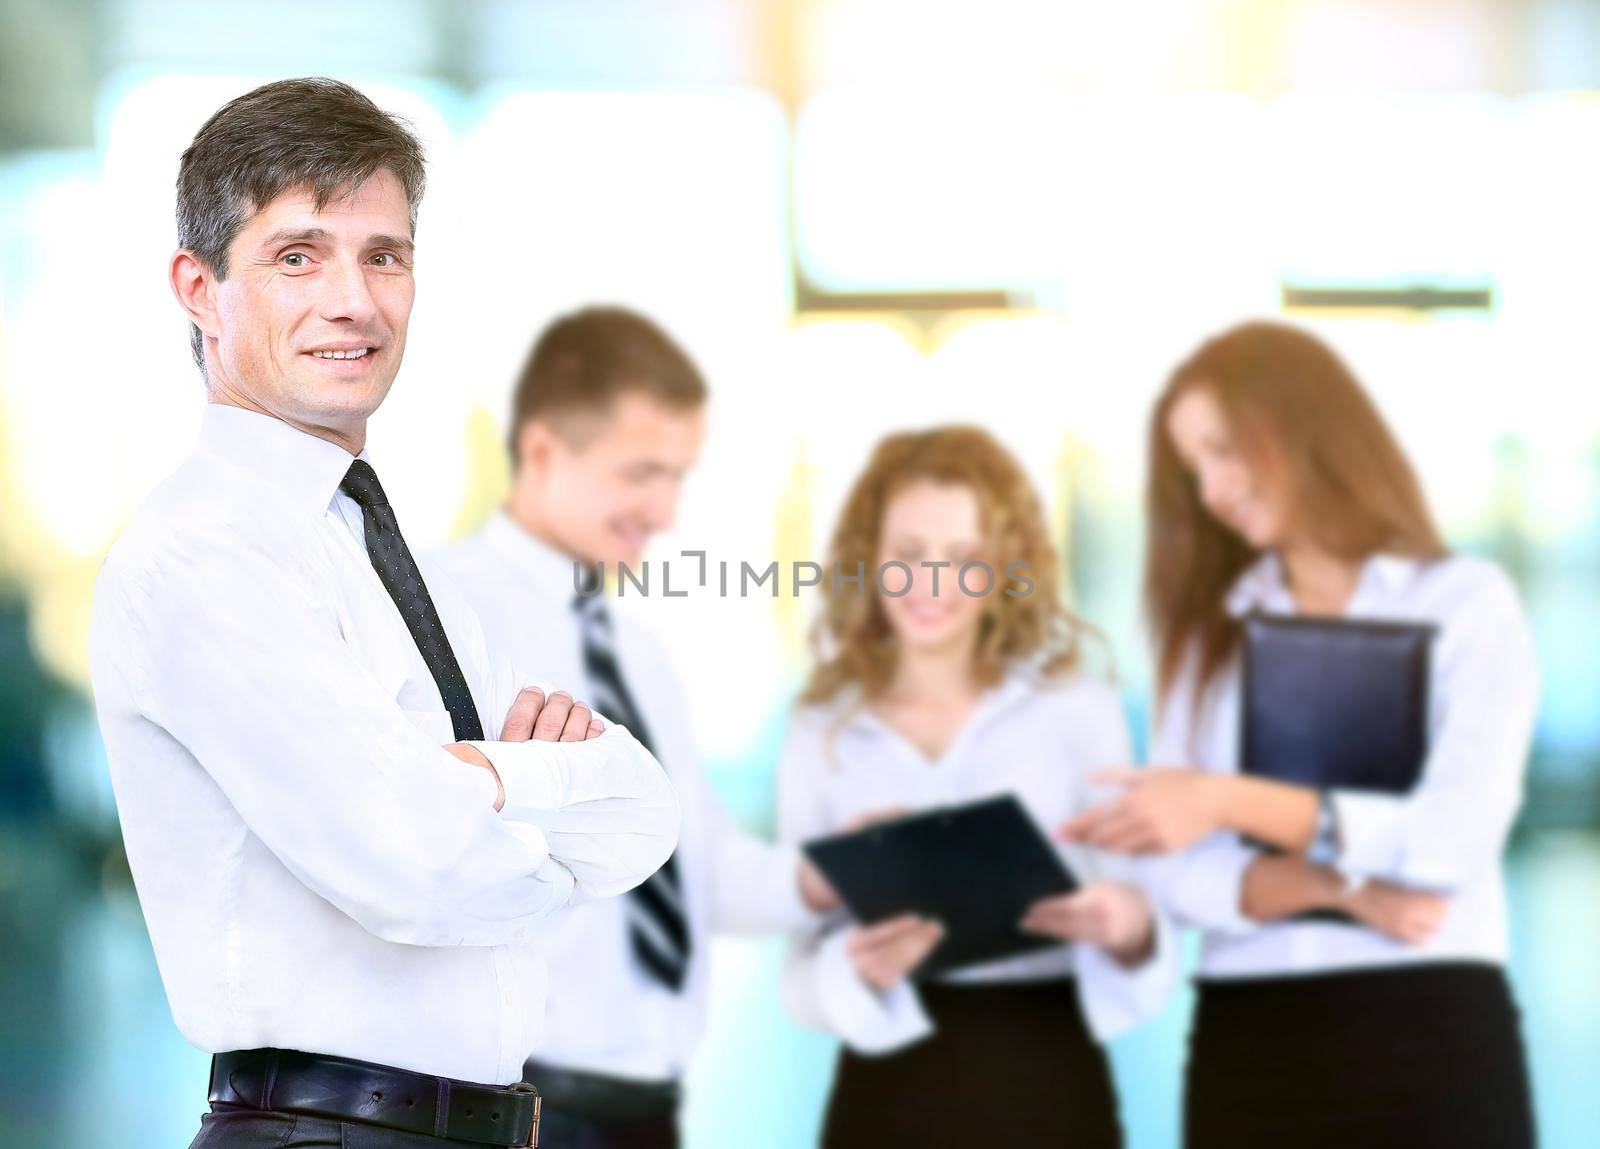 Successful business man standing with his staff in background at office